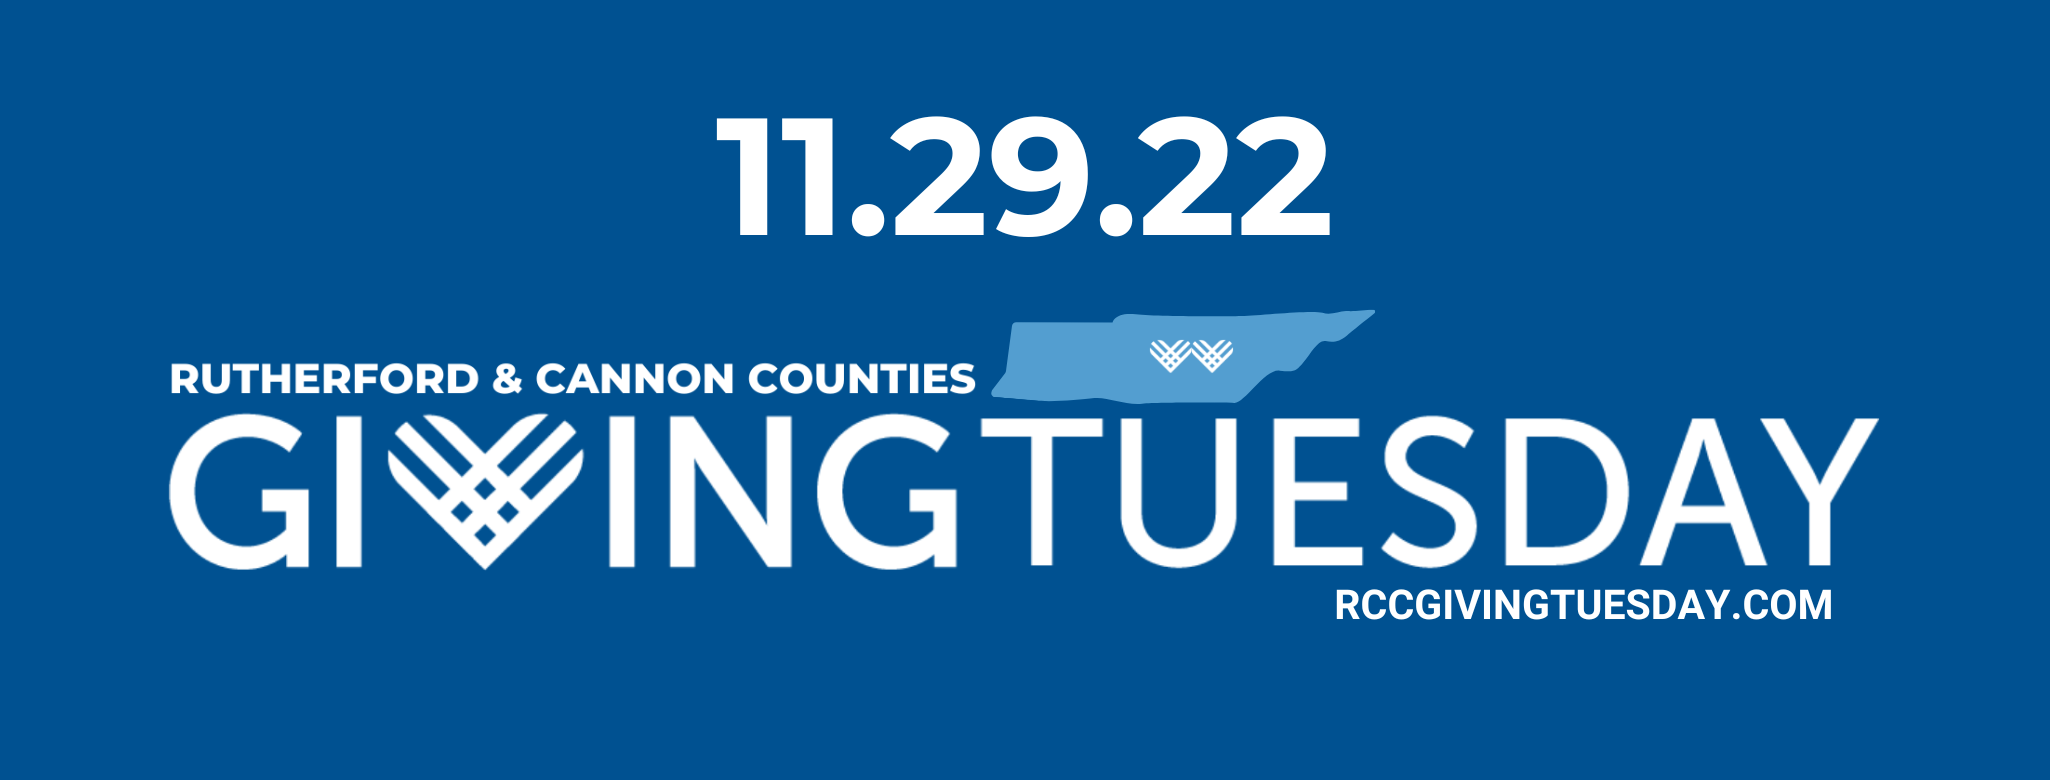 Giving Tuesday 112922